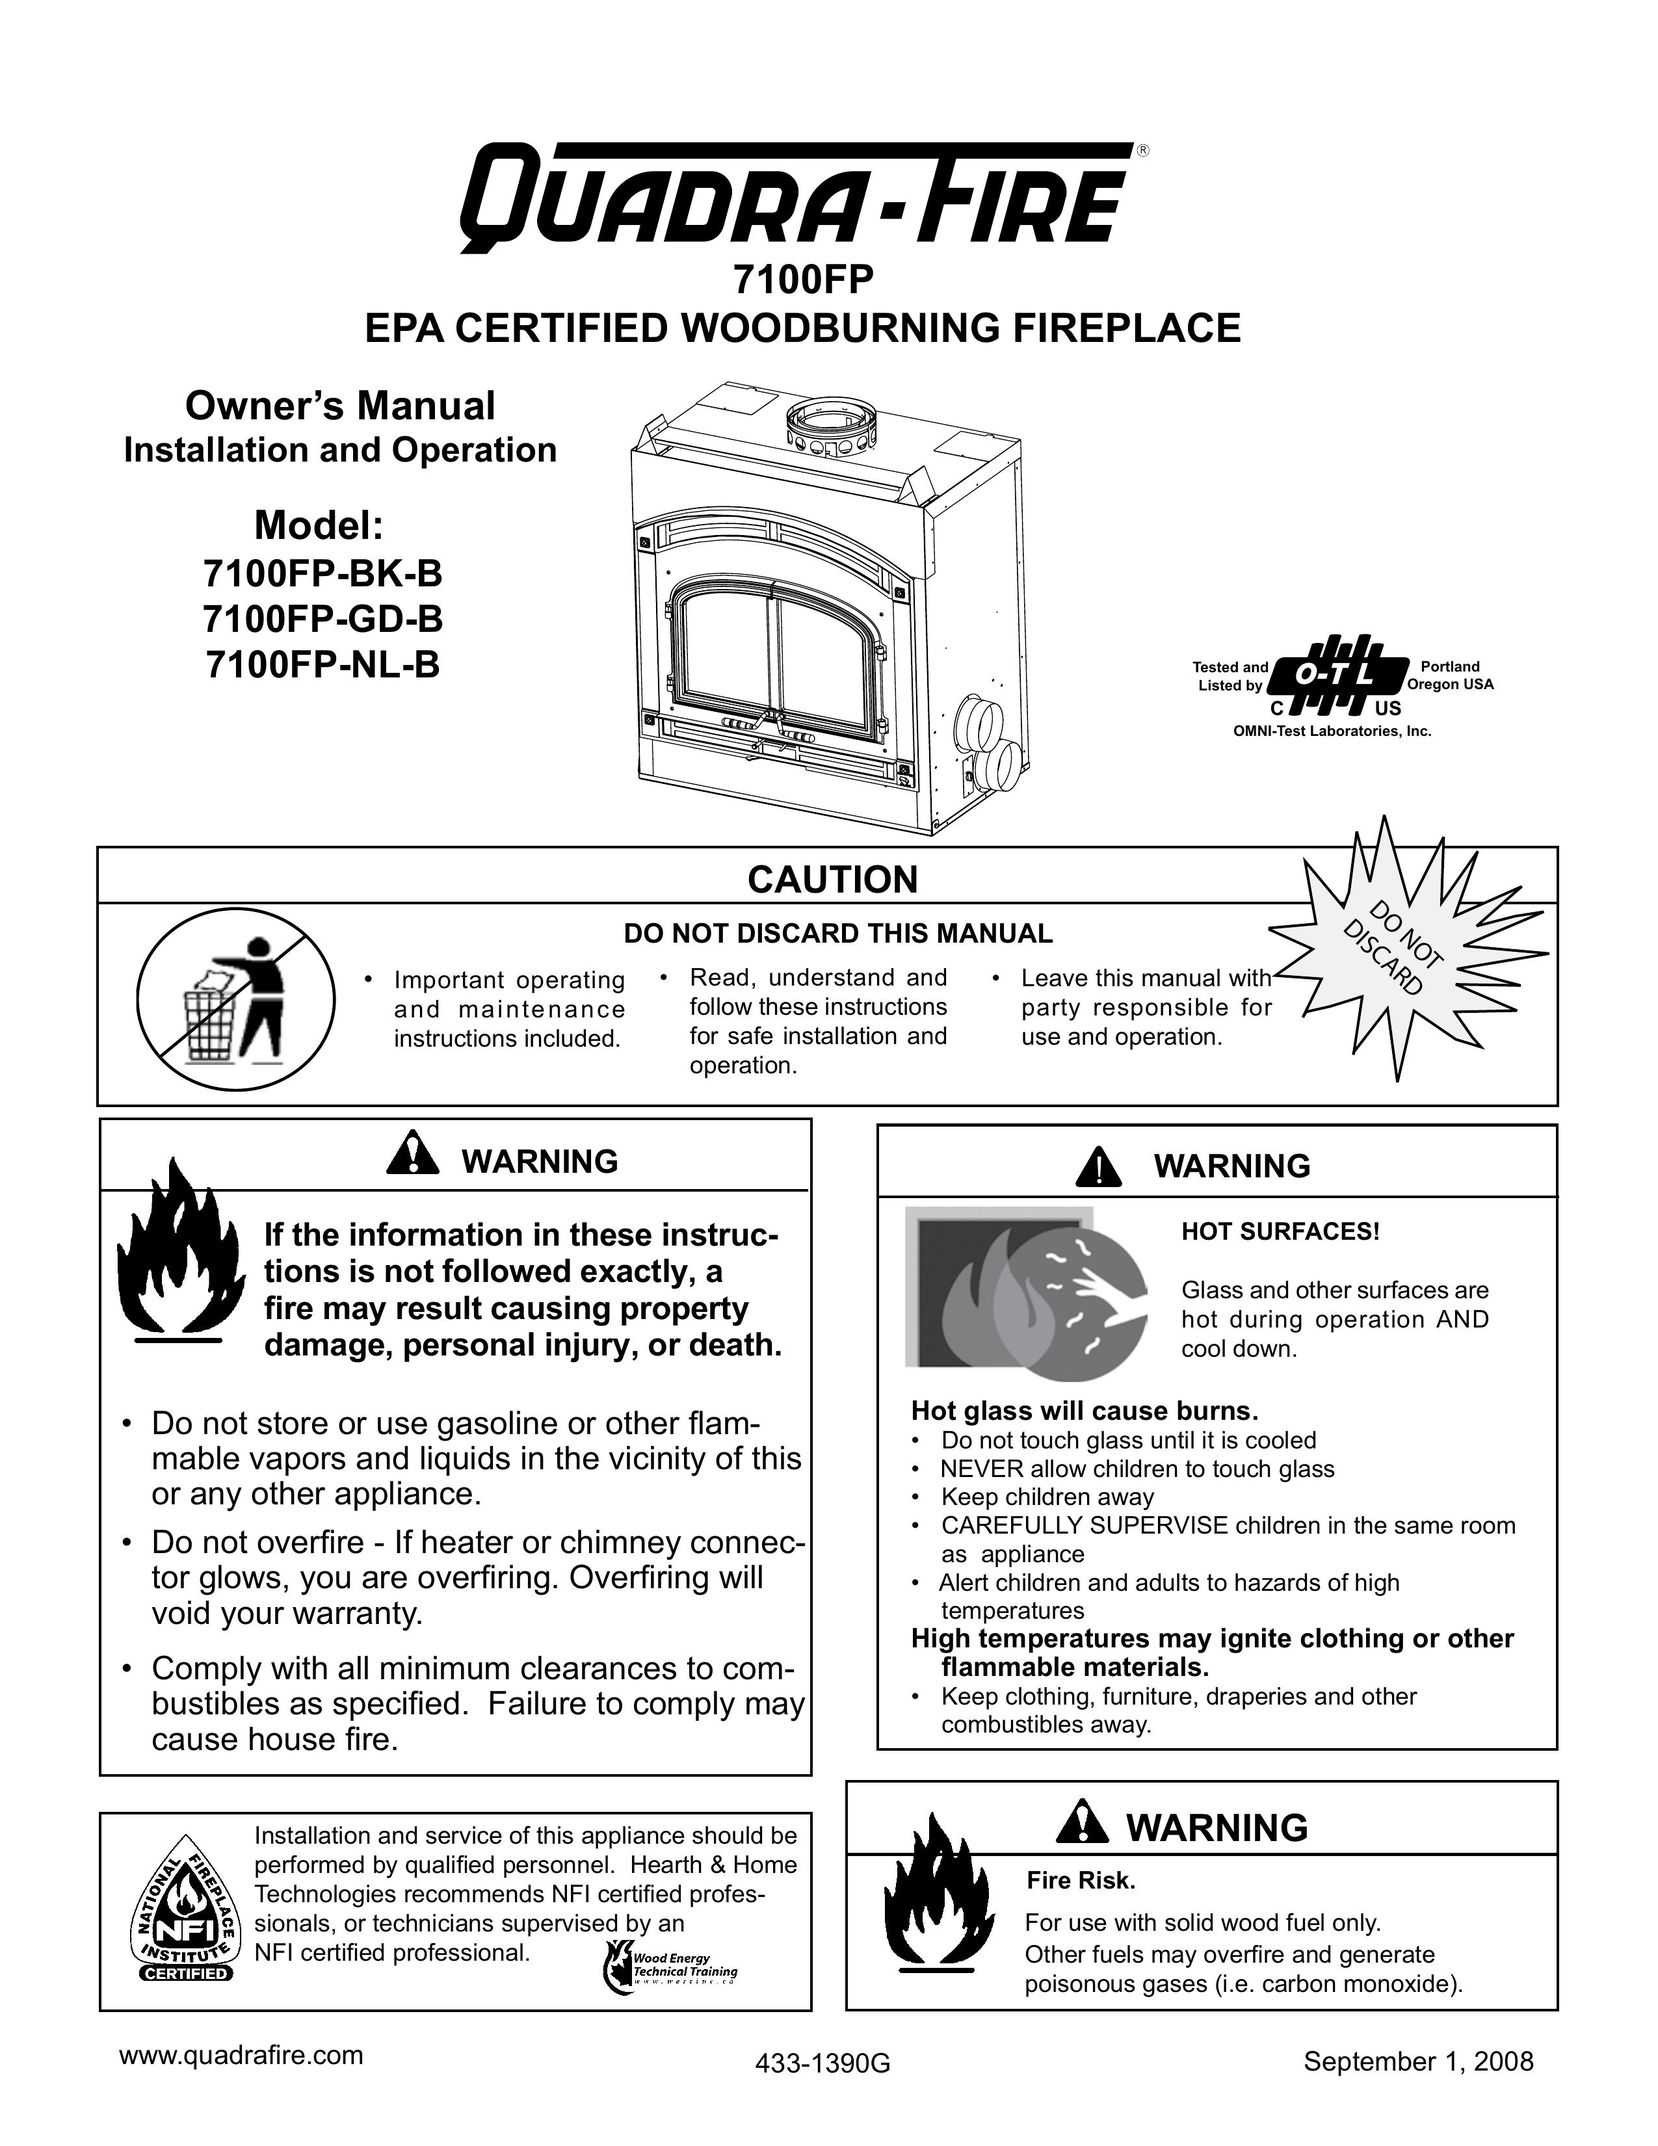 Hearth and Home Technologies 7100FP-NL-B Indoor Fireplace User Manual